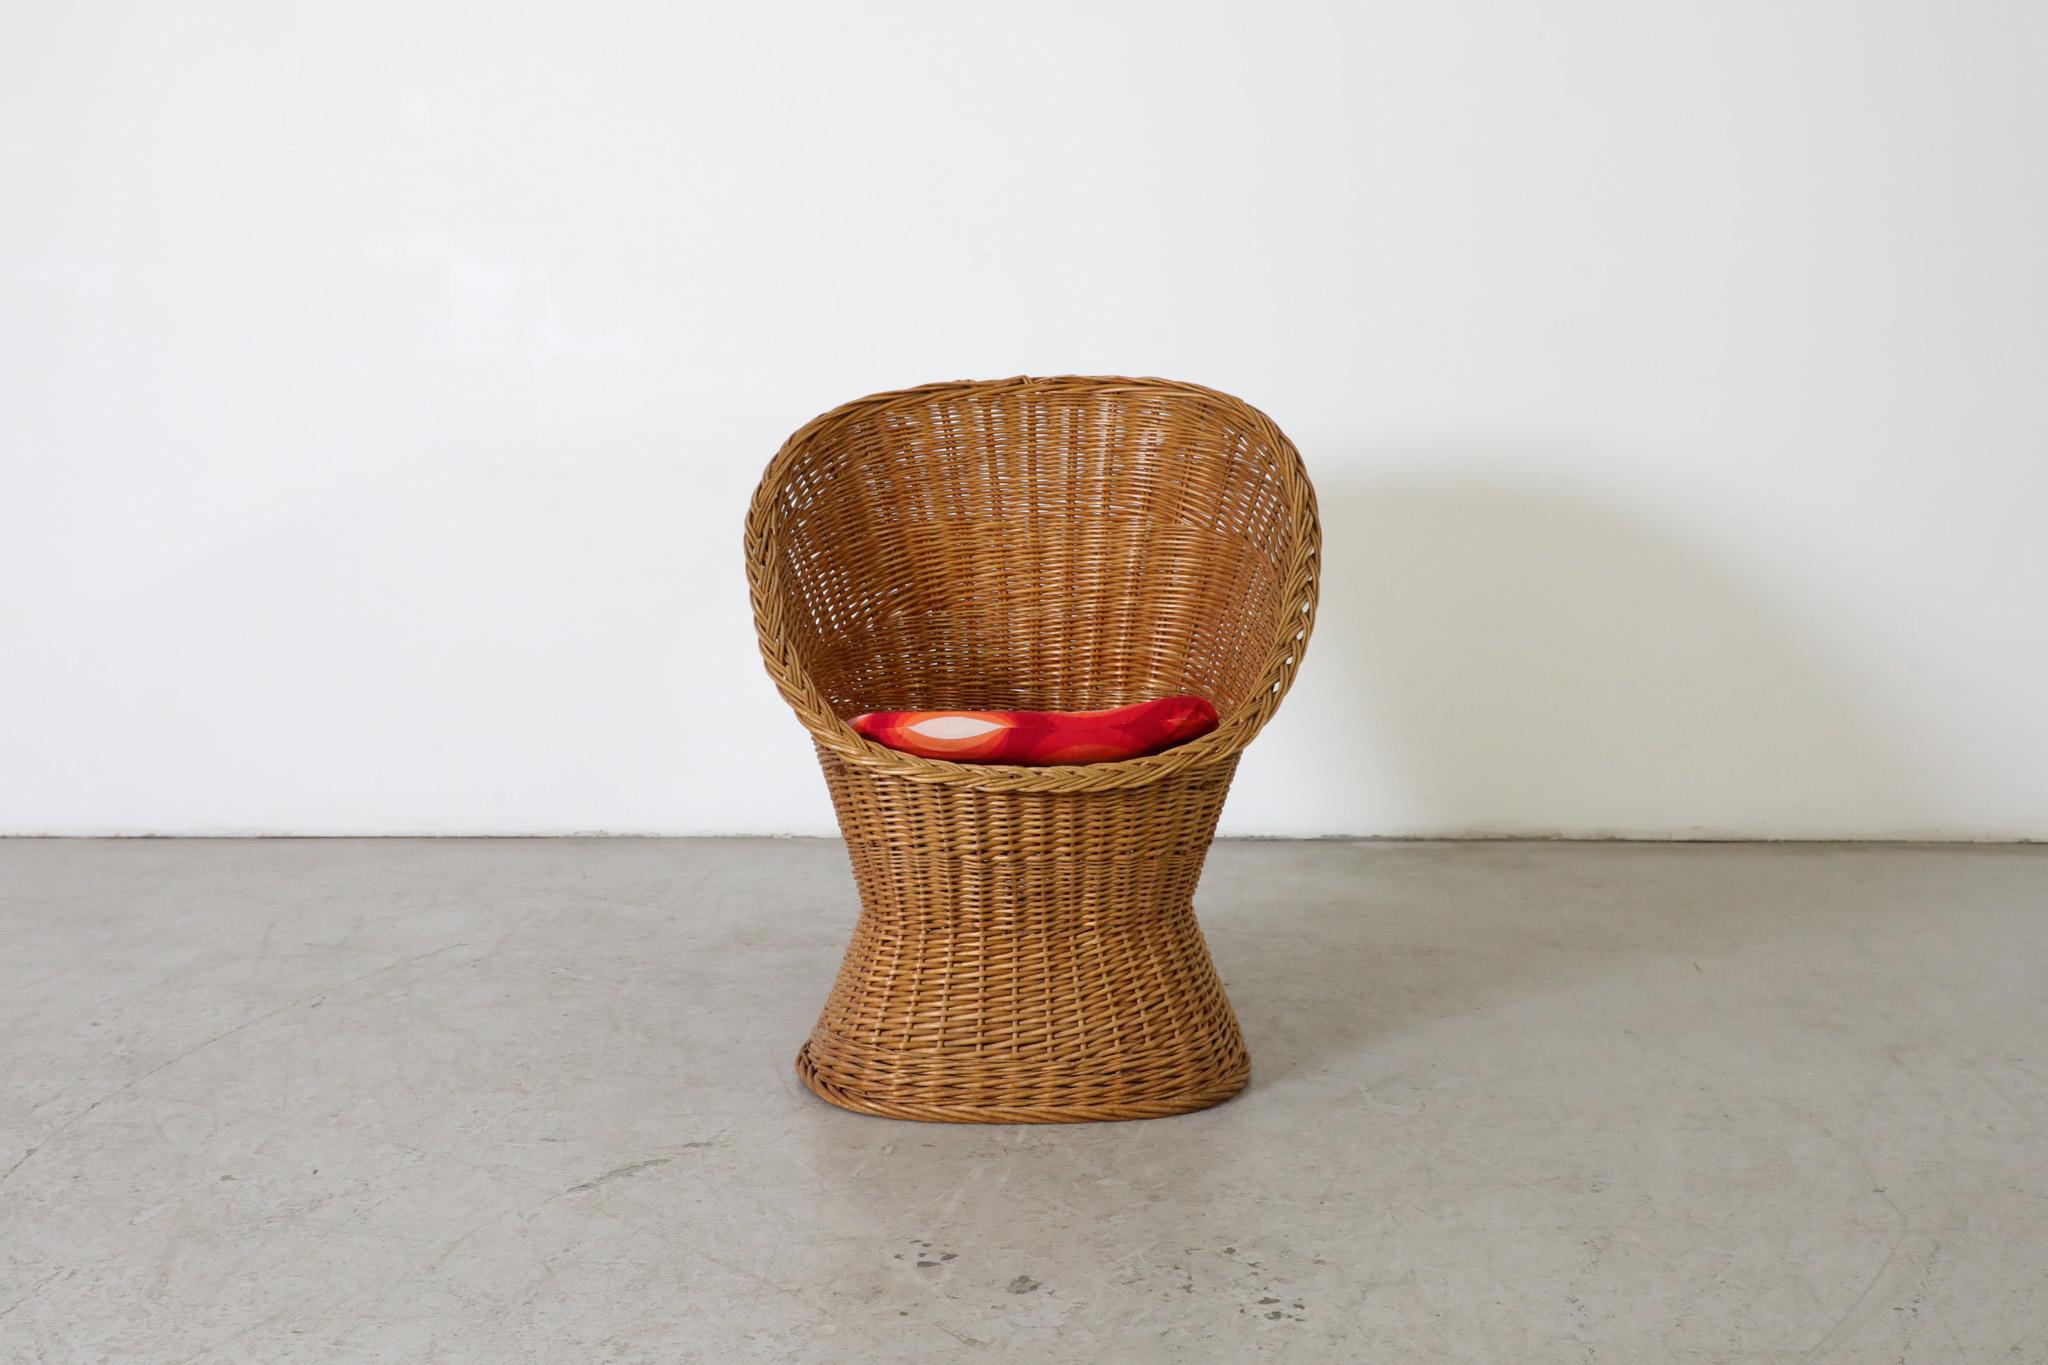 Mid-Century, hand woven rattan “Peacock” style lounge chair. in original condition with some wear appropriate for its age and use. Suitable for outdoor use with proper care and maintenance under dry, protected, covered area and covered or stored